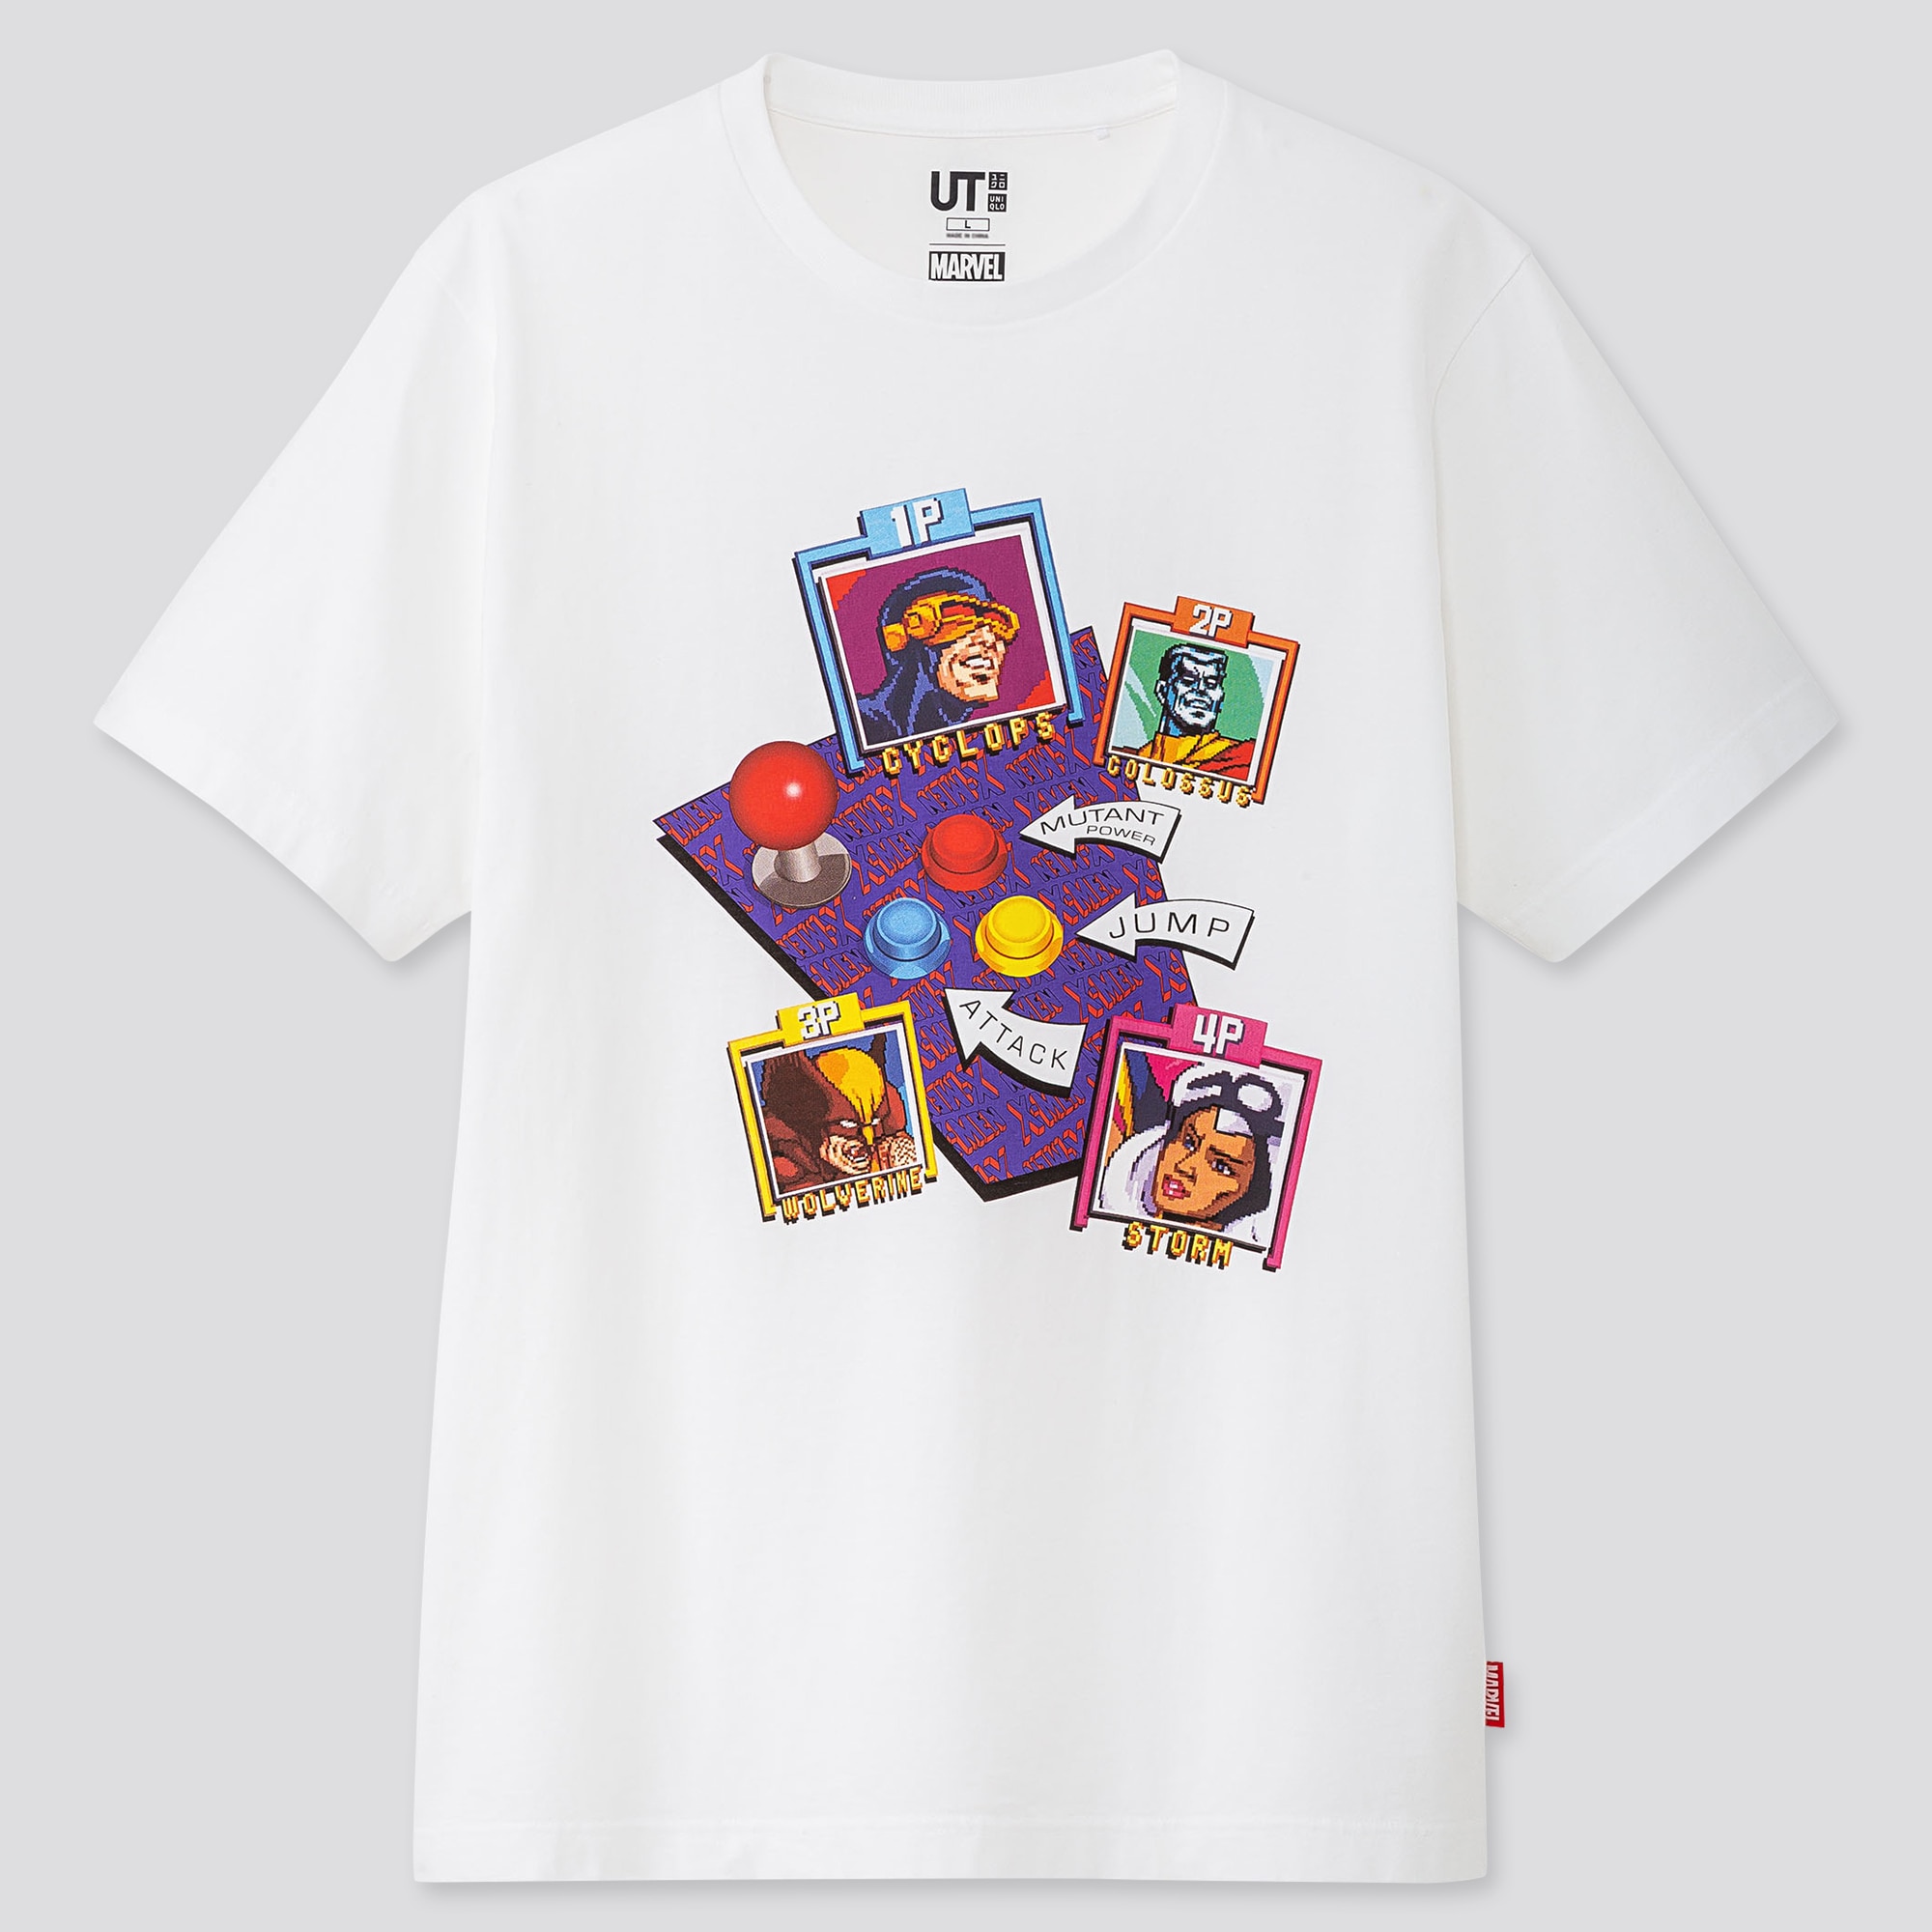 Uniqlo Malaysia T Shirt - A series of fashionable clothes are all ...